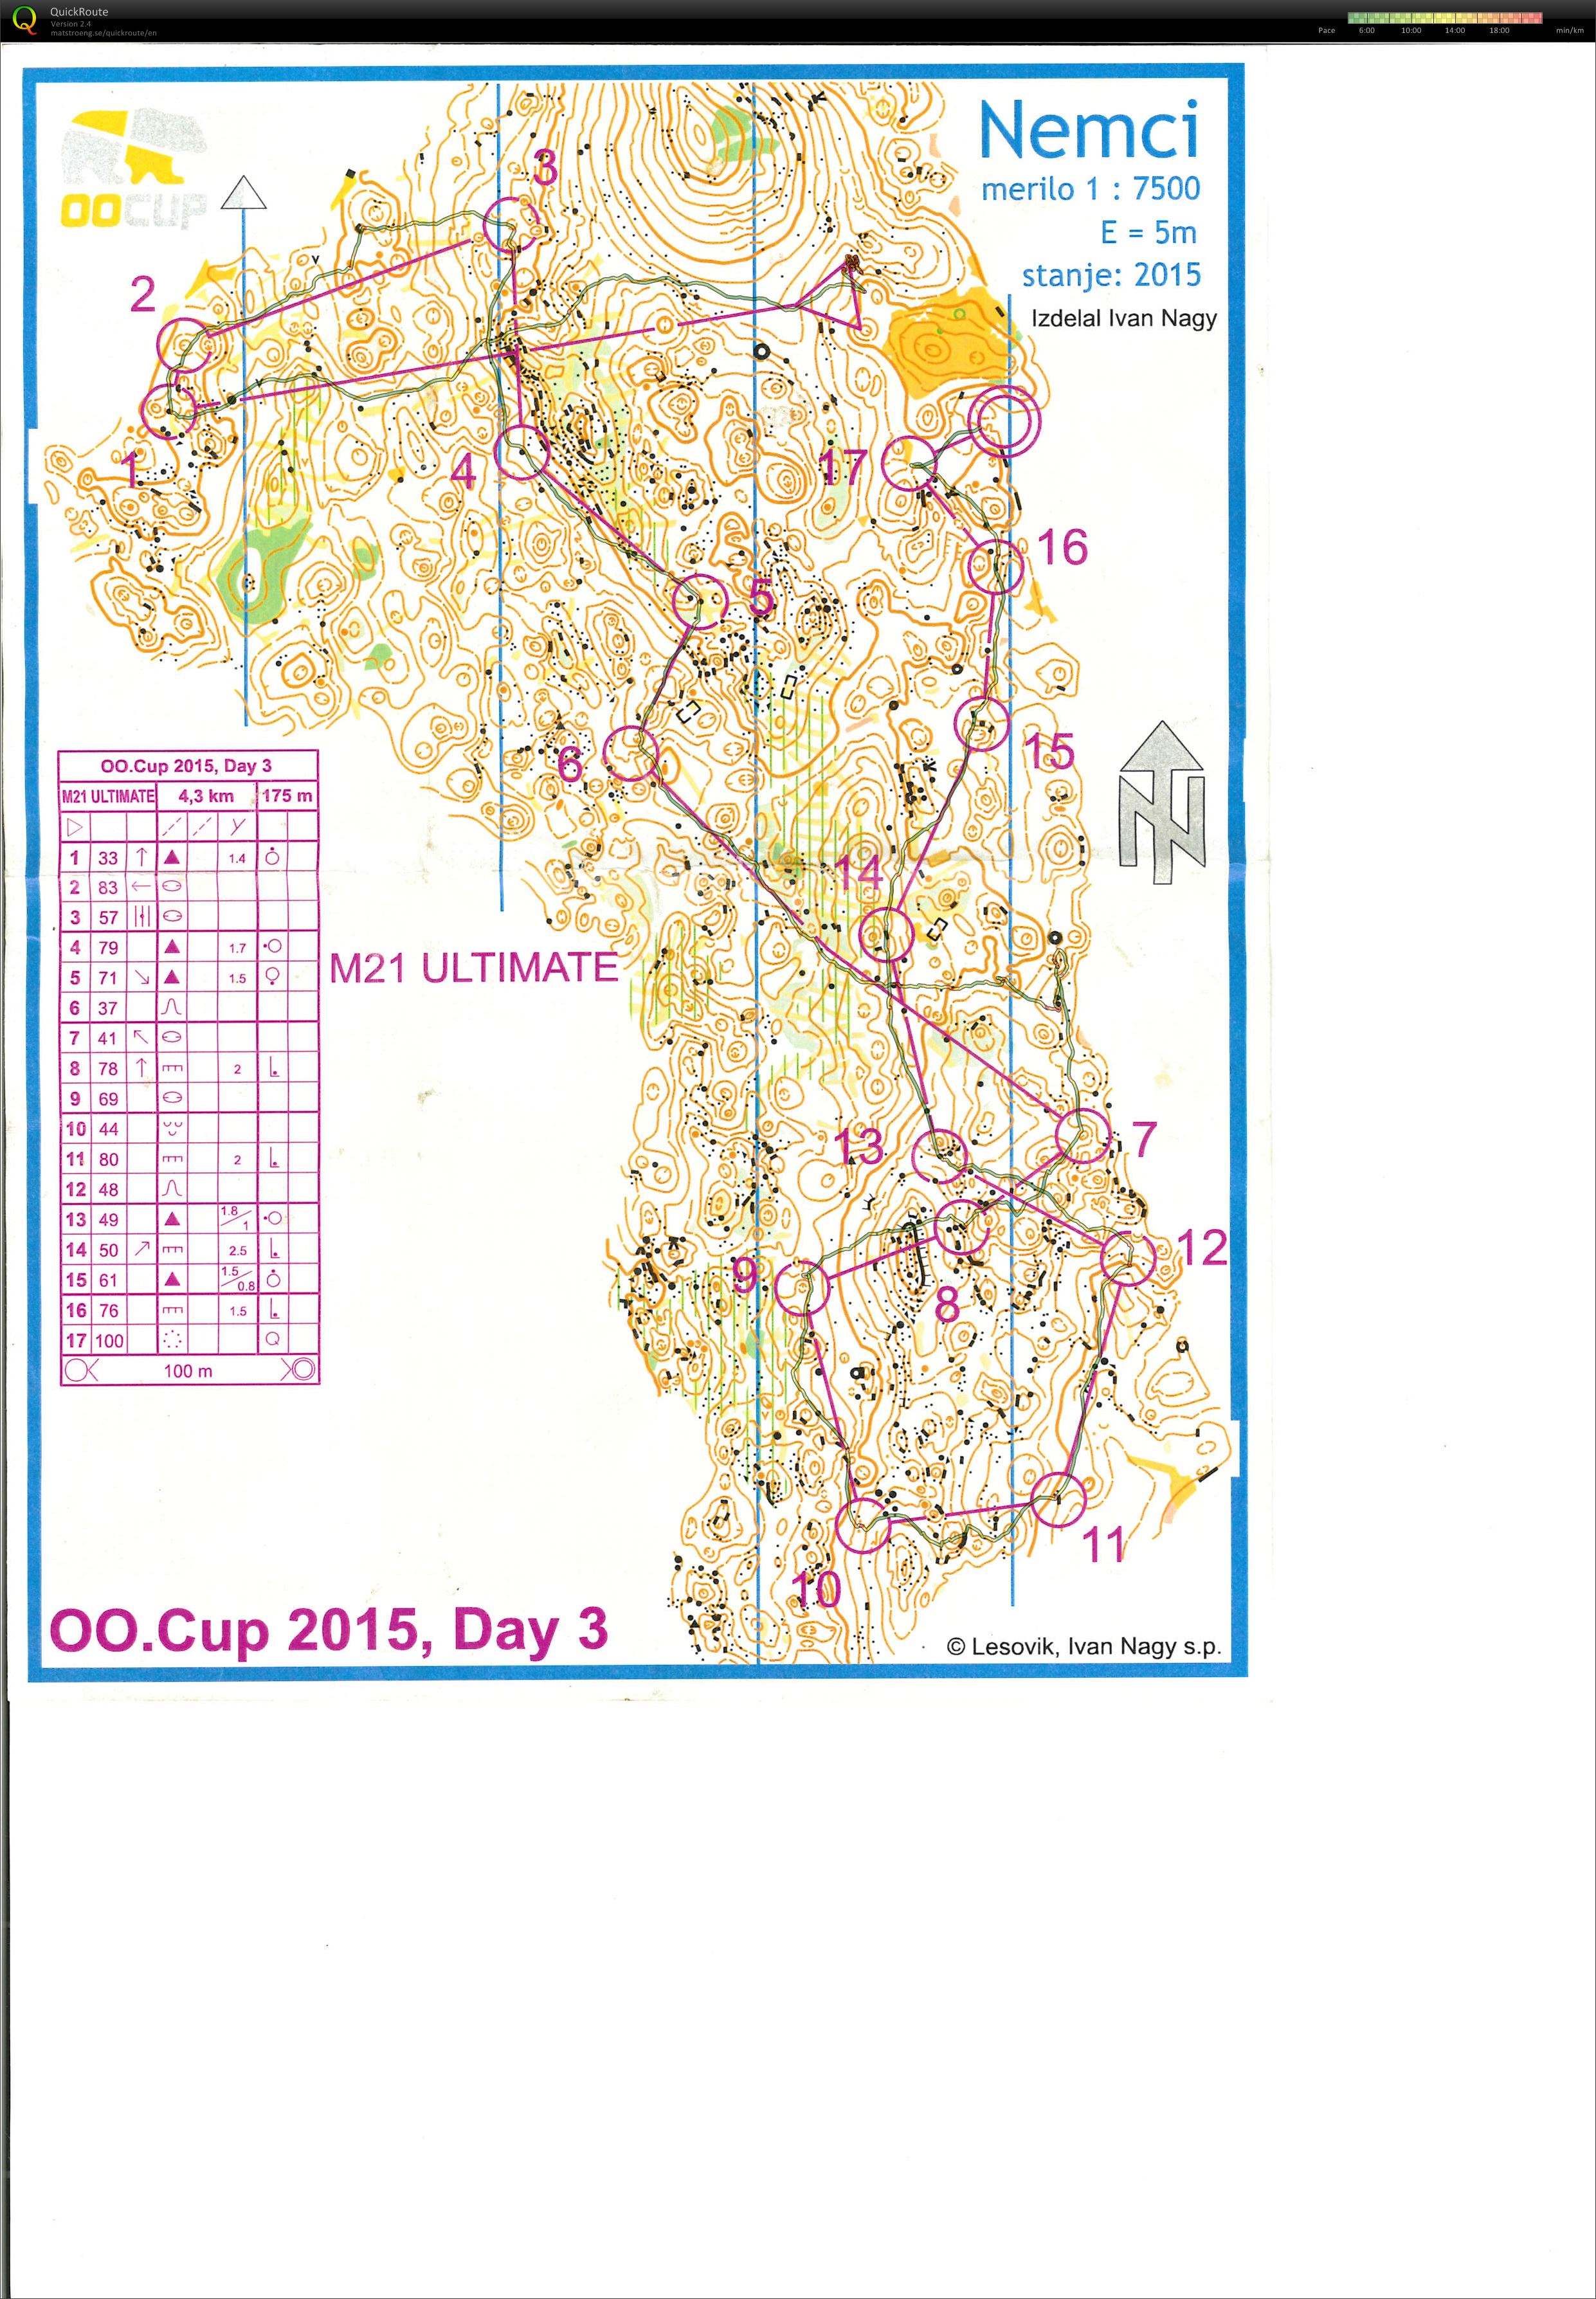 OOCup 2015 Stage 3 (27.07.2015)